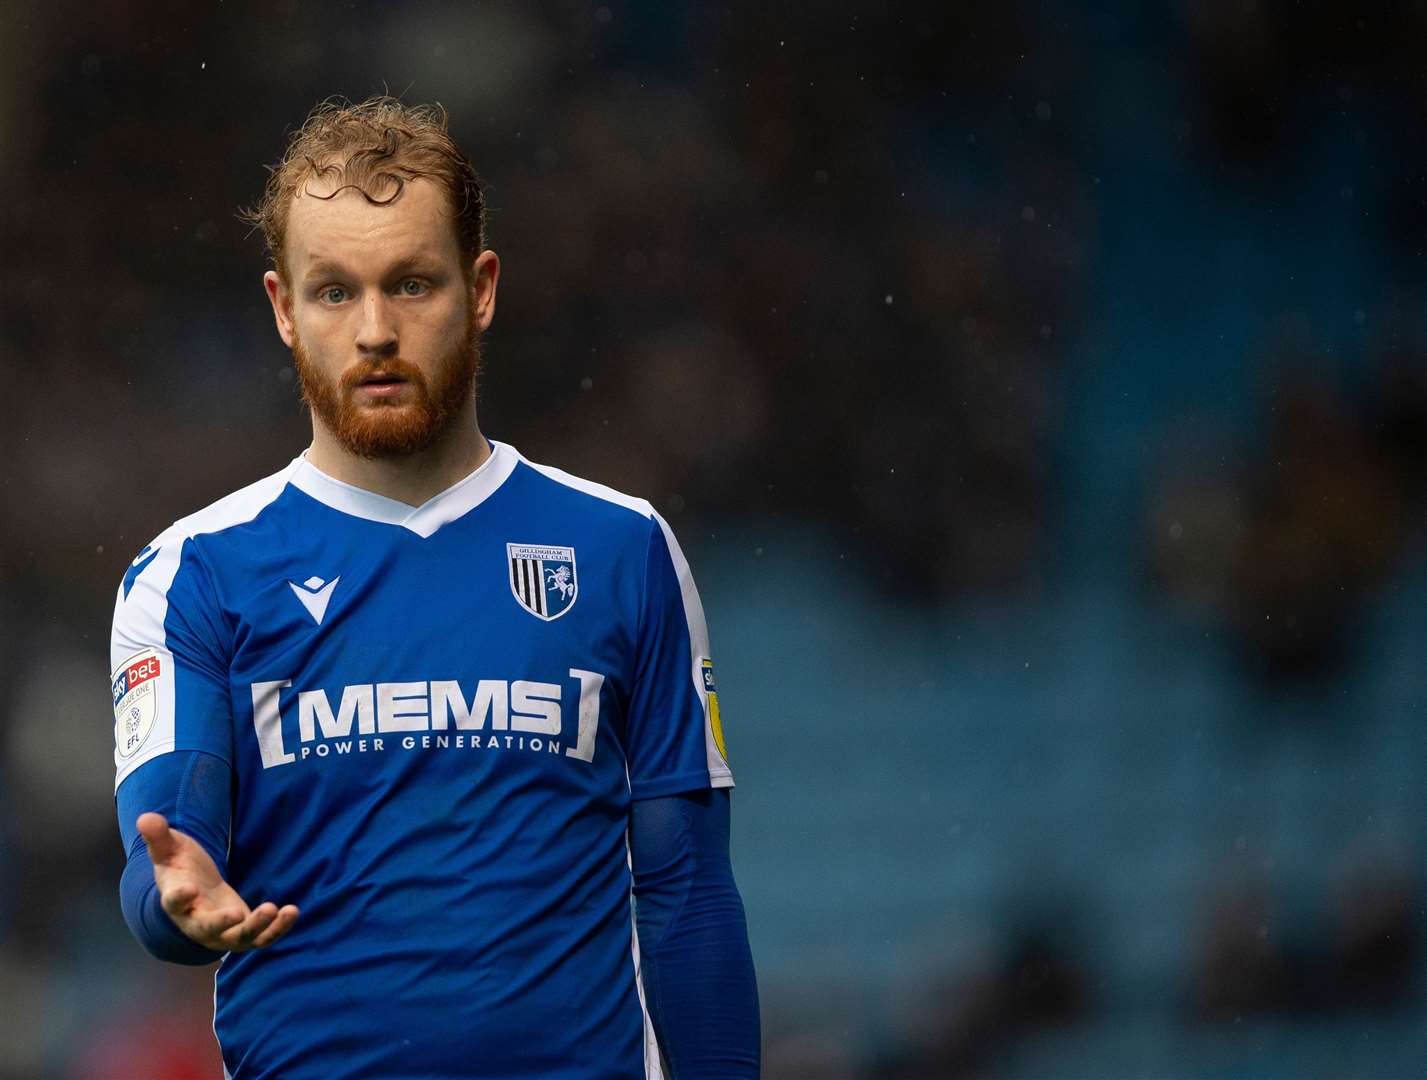 Connor Ogilvie has signed for Gillingham's League 1 rivals Portsmouth